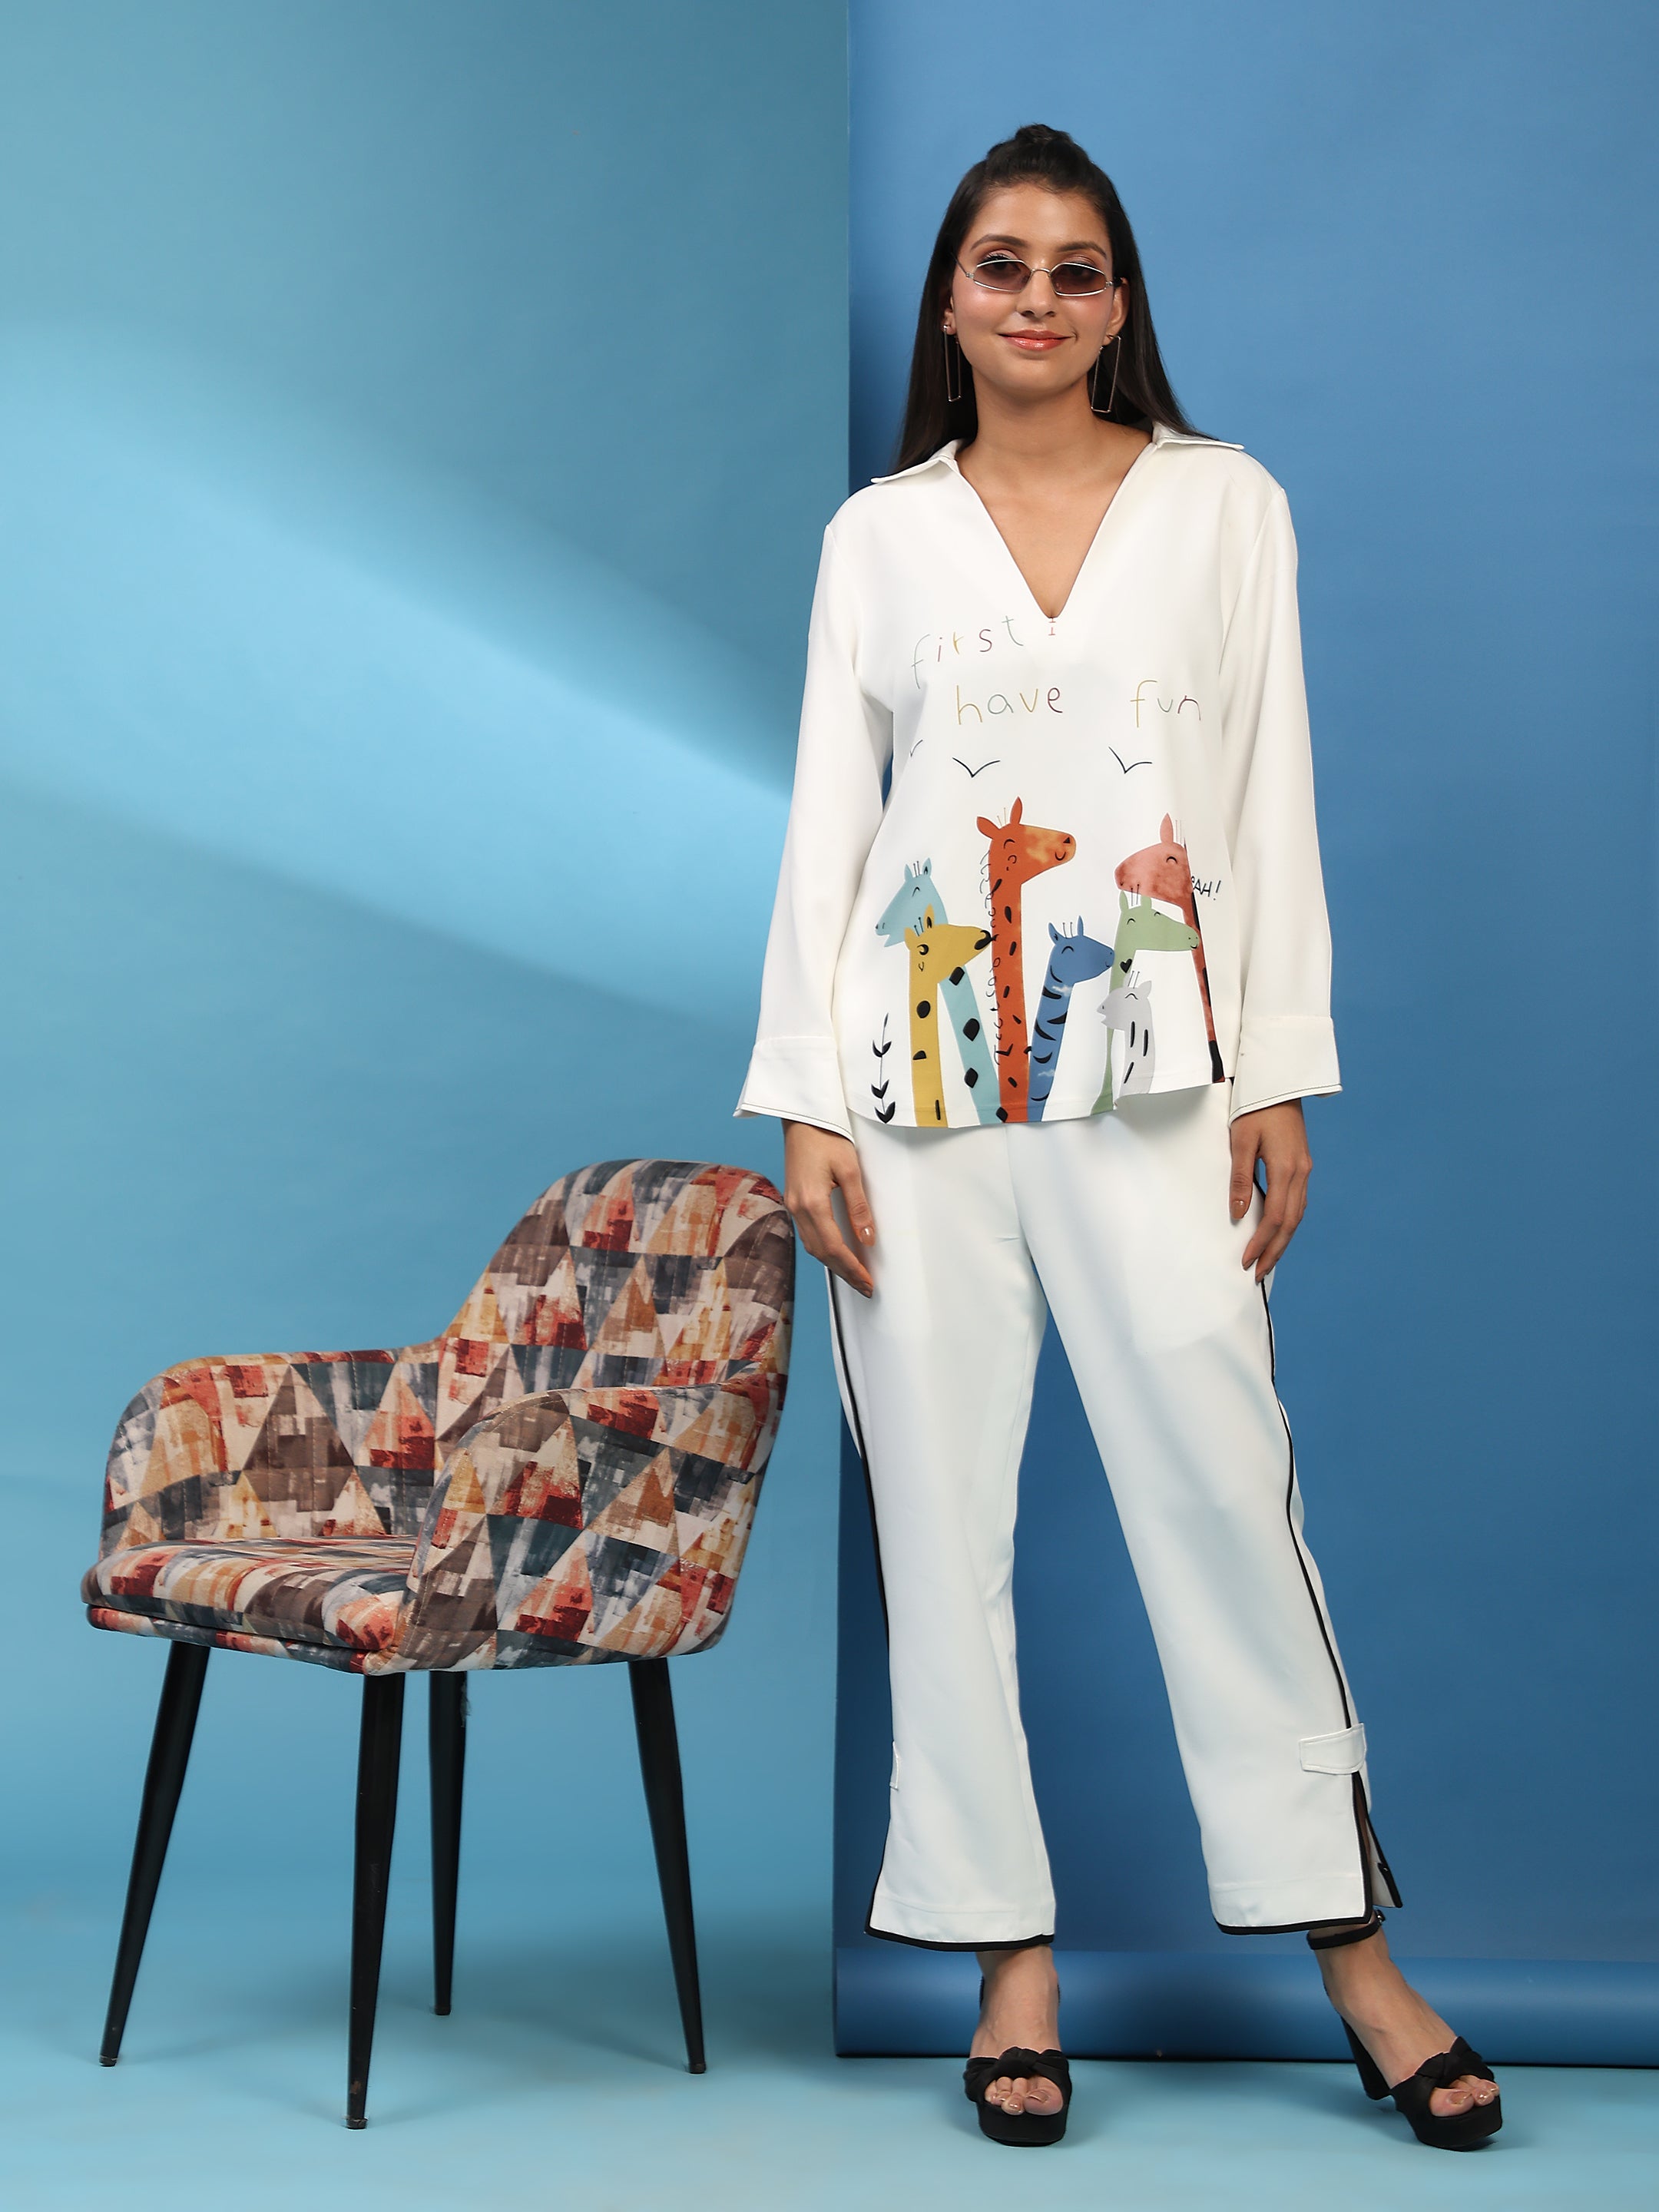 Women's Indowestern Ensemble In Off-White Butter Crepe Fabric Fusion Of Traditional And Contemporary Design Elements - Phenav